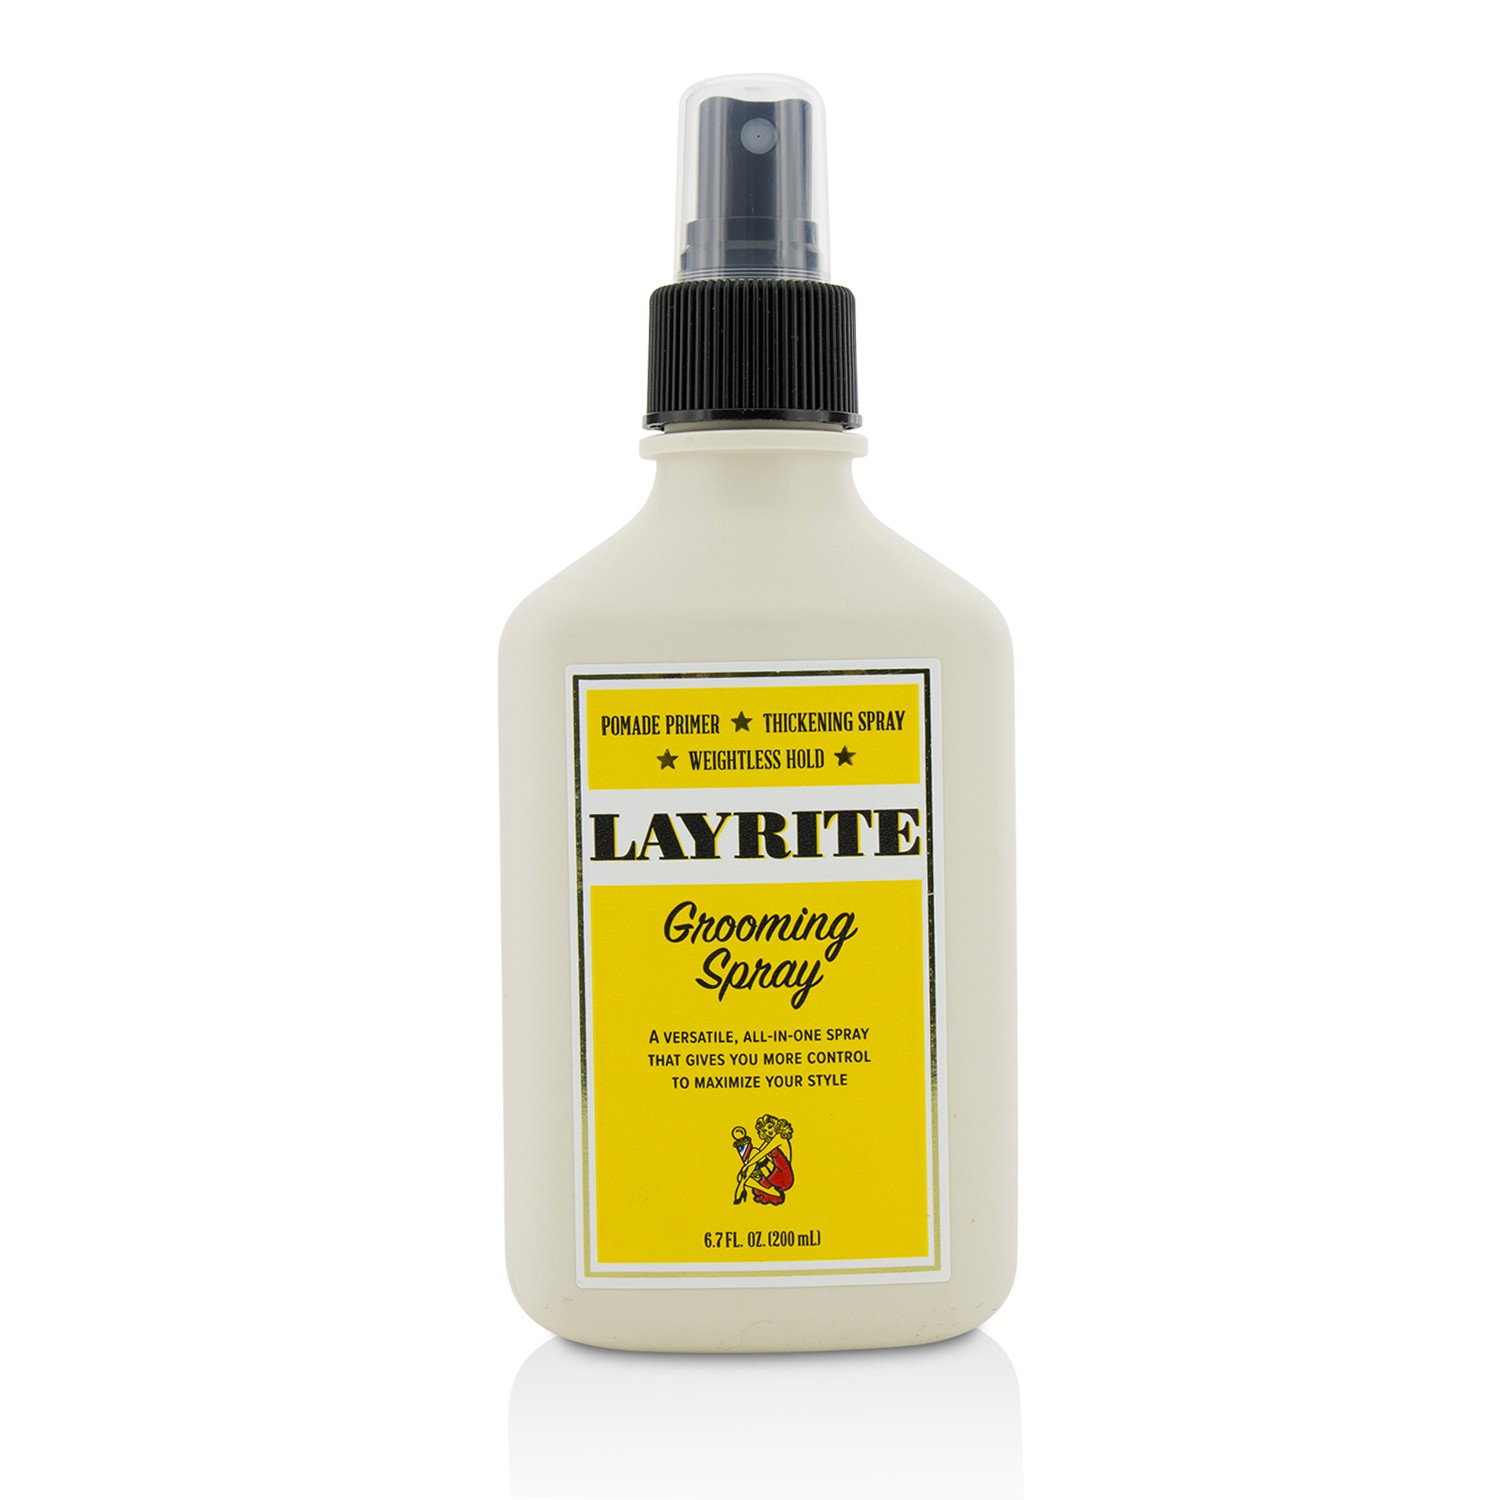 Grooming Spray (Pomade Primer Thickening Spray Weightless Hold) Layrite Image